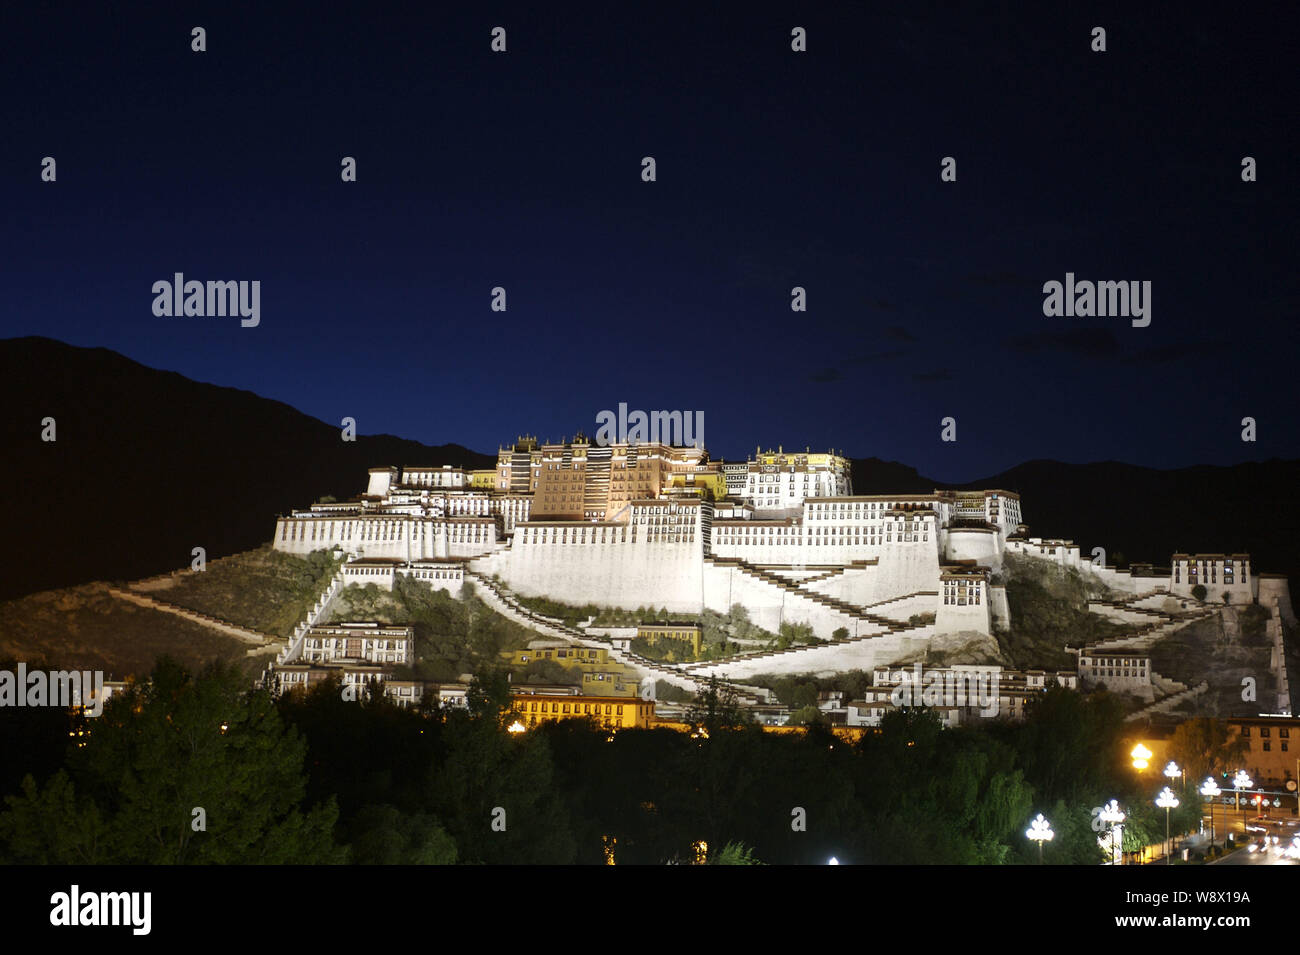 Night view of a Buddha sculpture at the Potala Palace in Lhasa, southwest Chinas Tibet Autonomous Region, August 2006. Stock Photo